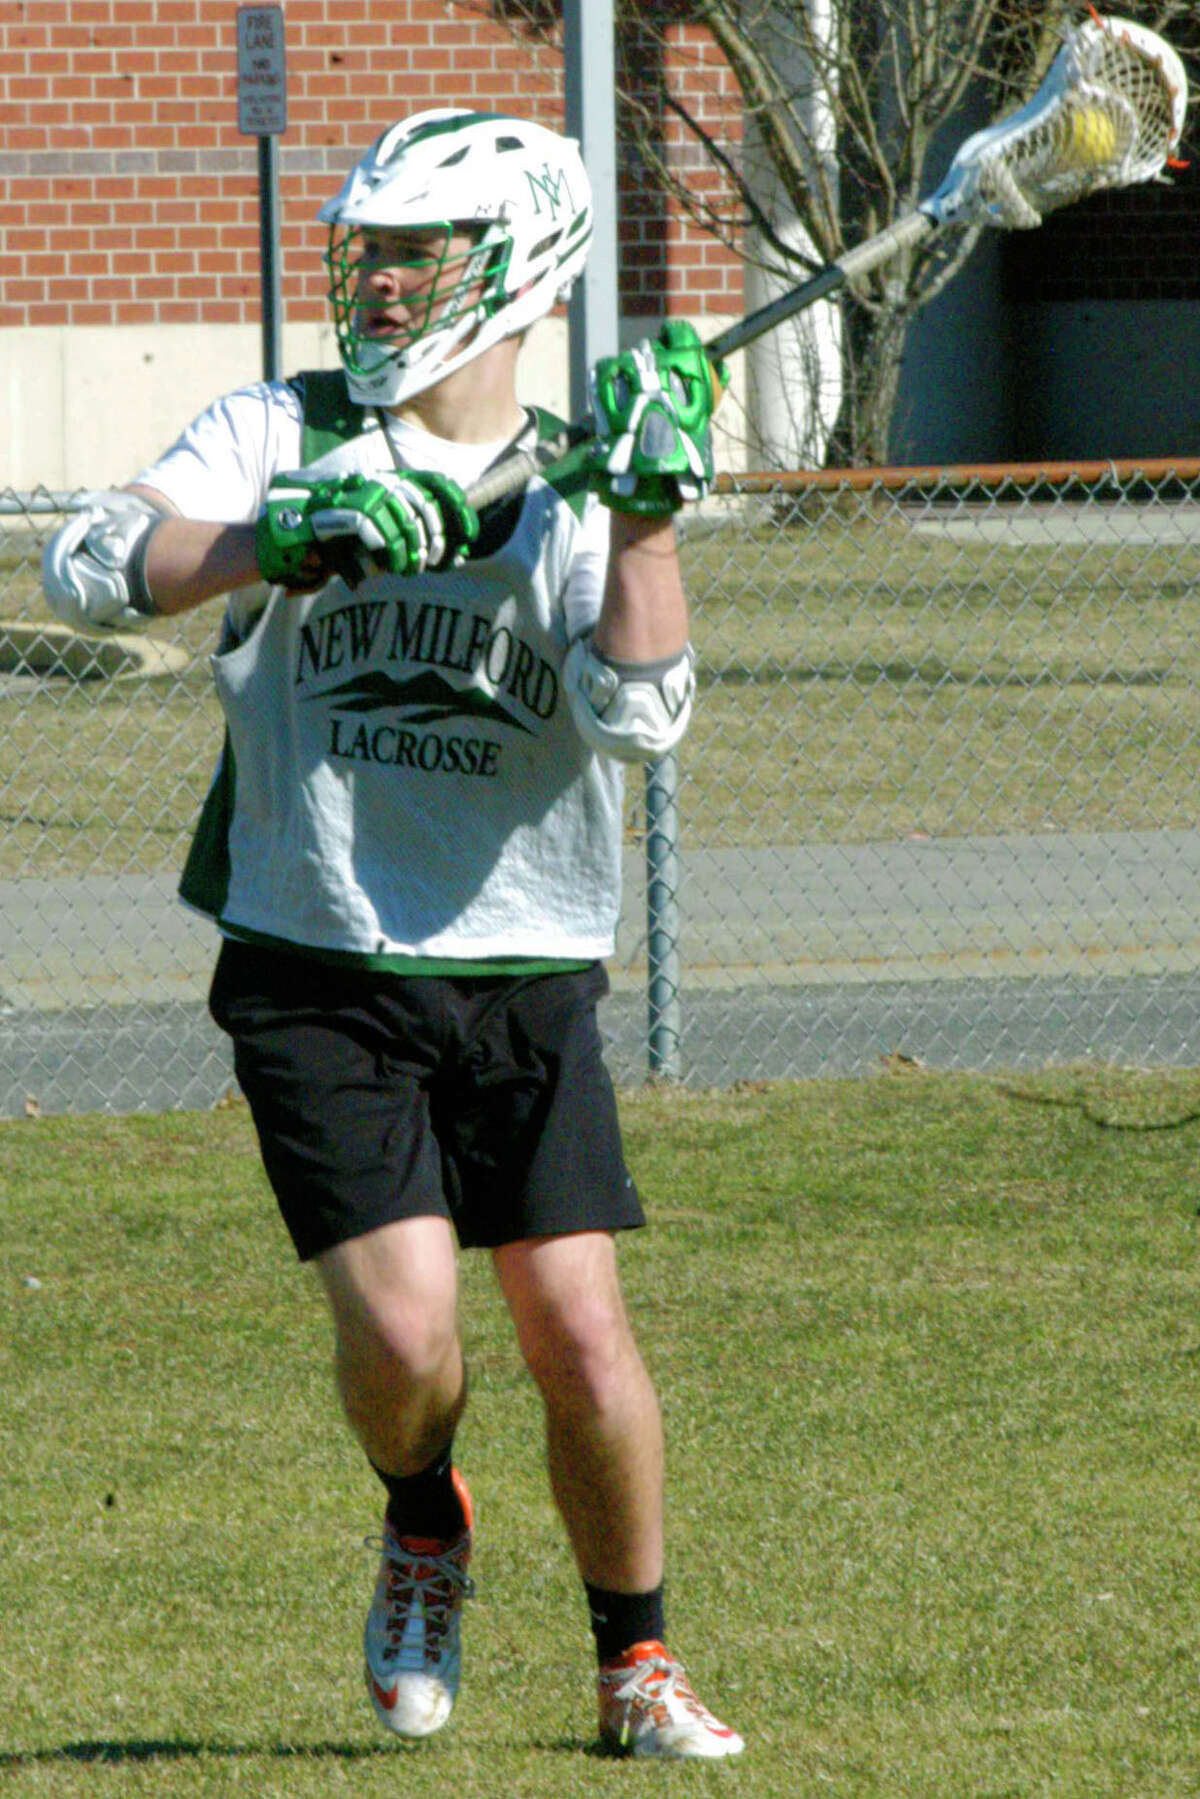 The Green Wave's Turner Ellis looks for an open teammate during a pre-season practice for New Milford High School boys' lacrosse. April 2014